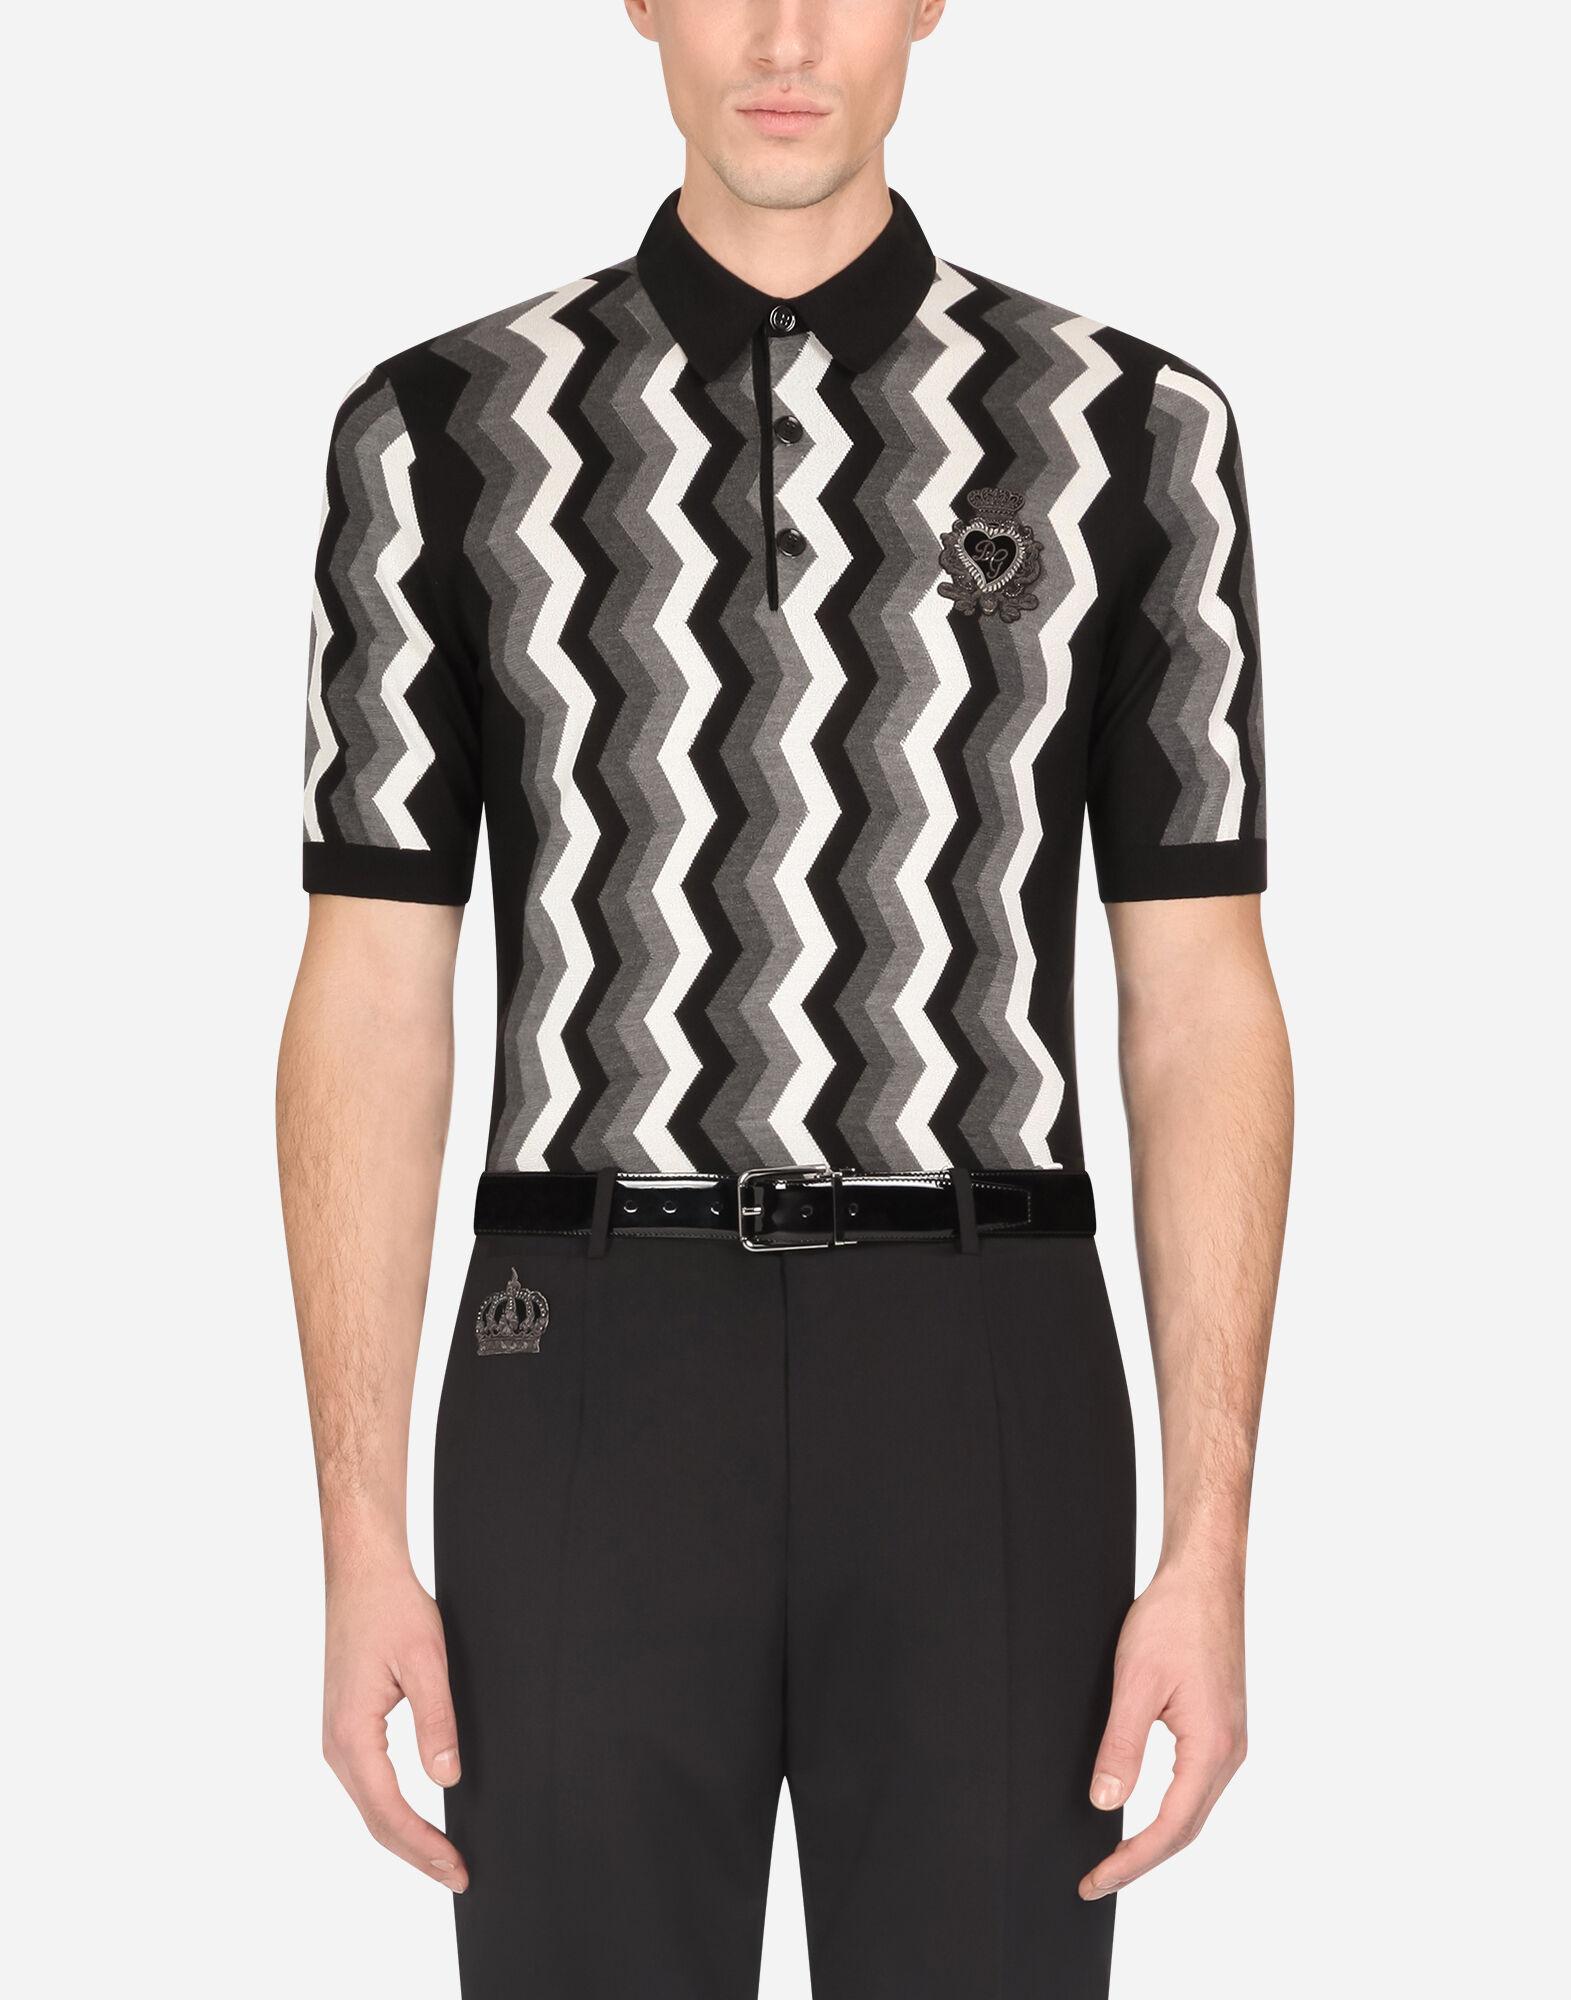 Dolce & Gabbana Silk Polo Neck With Heraldic Patch in Black for Men - Lyst